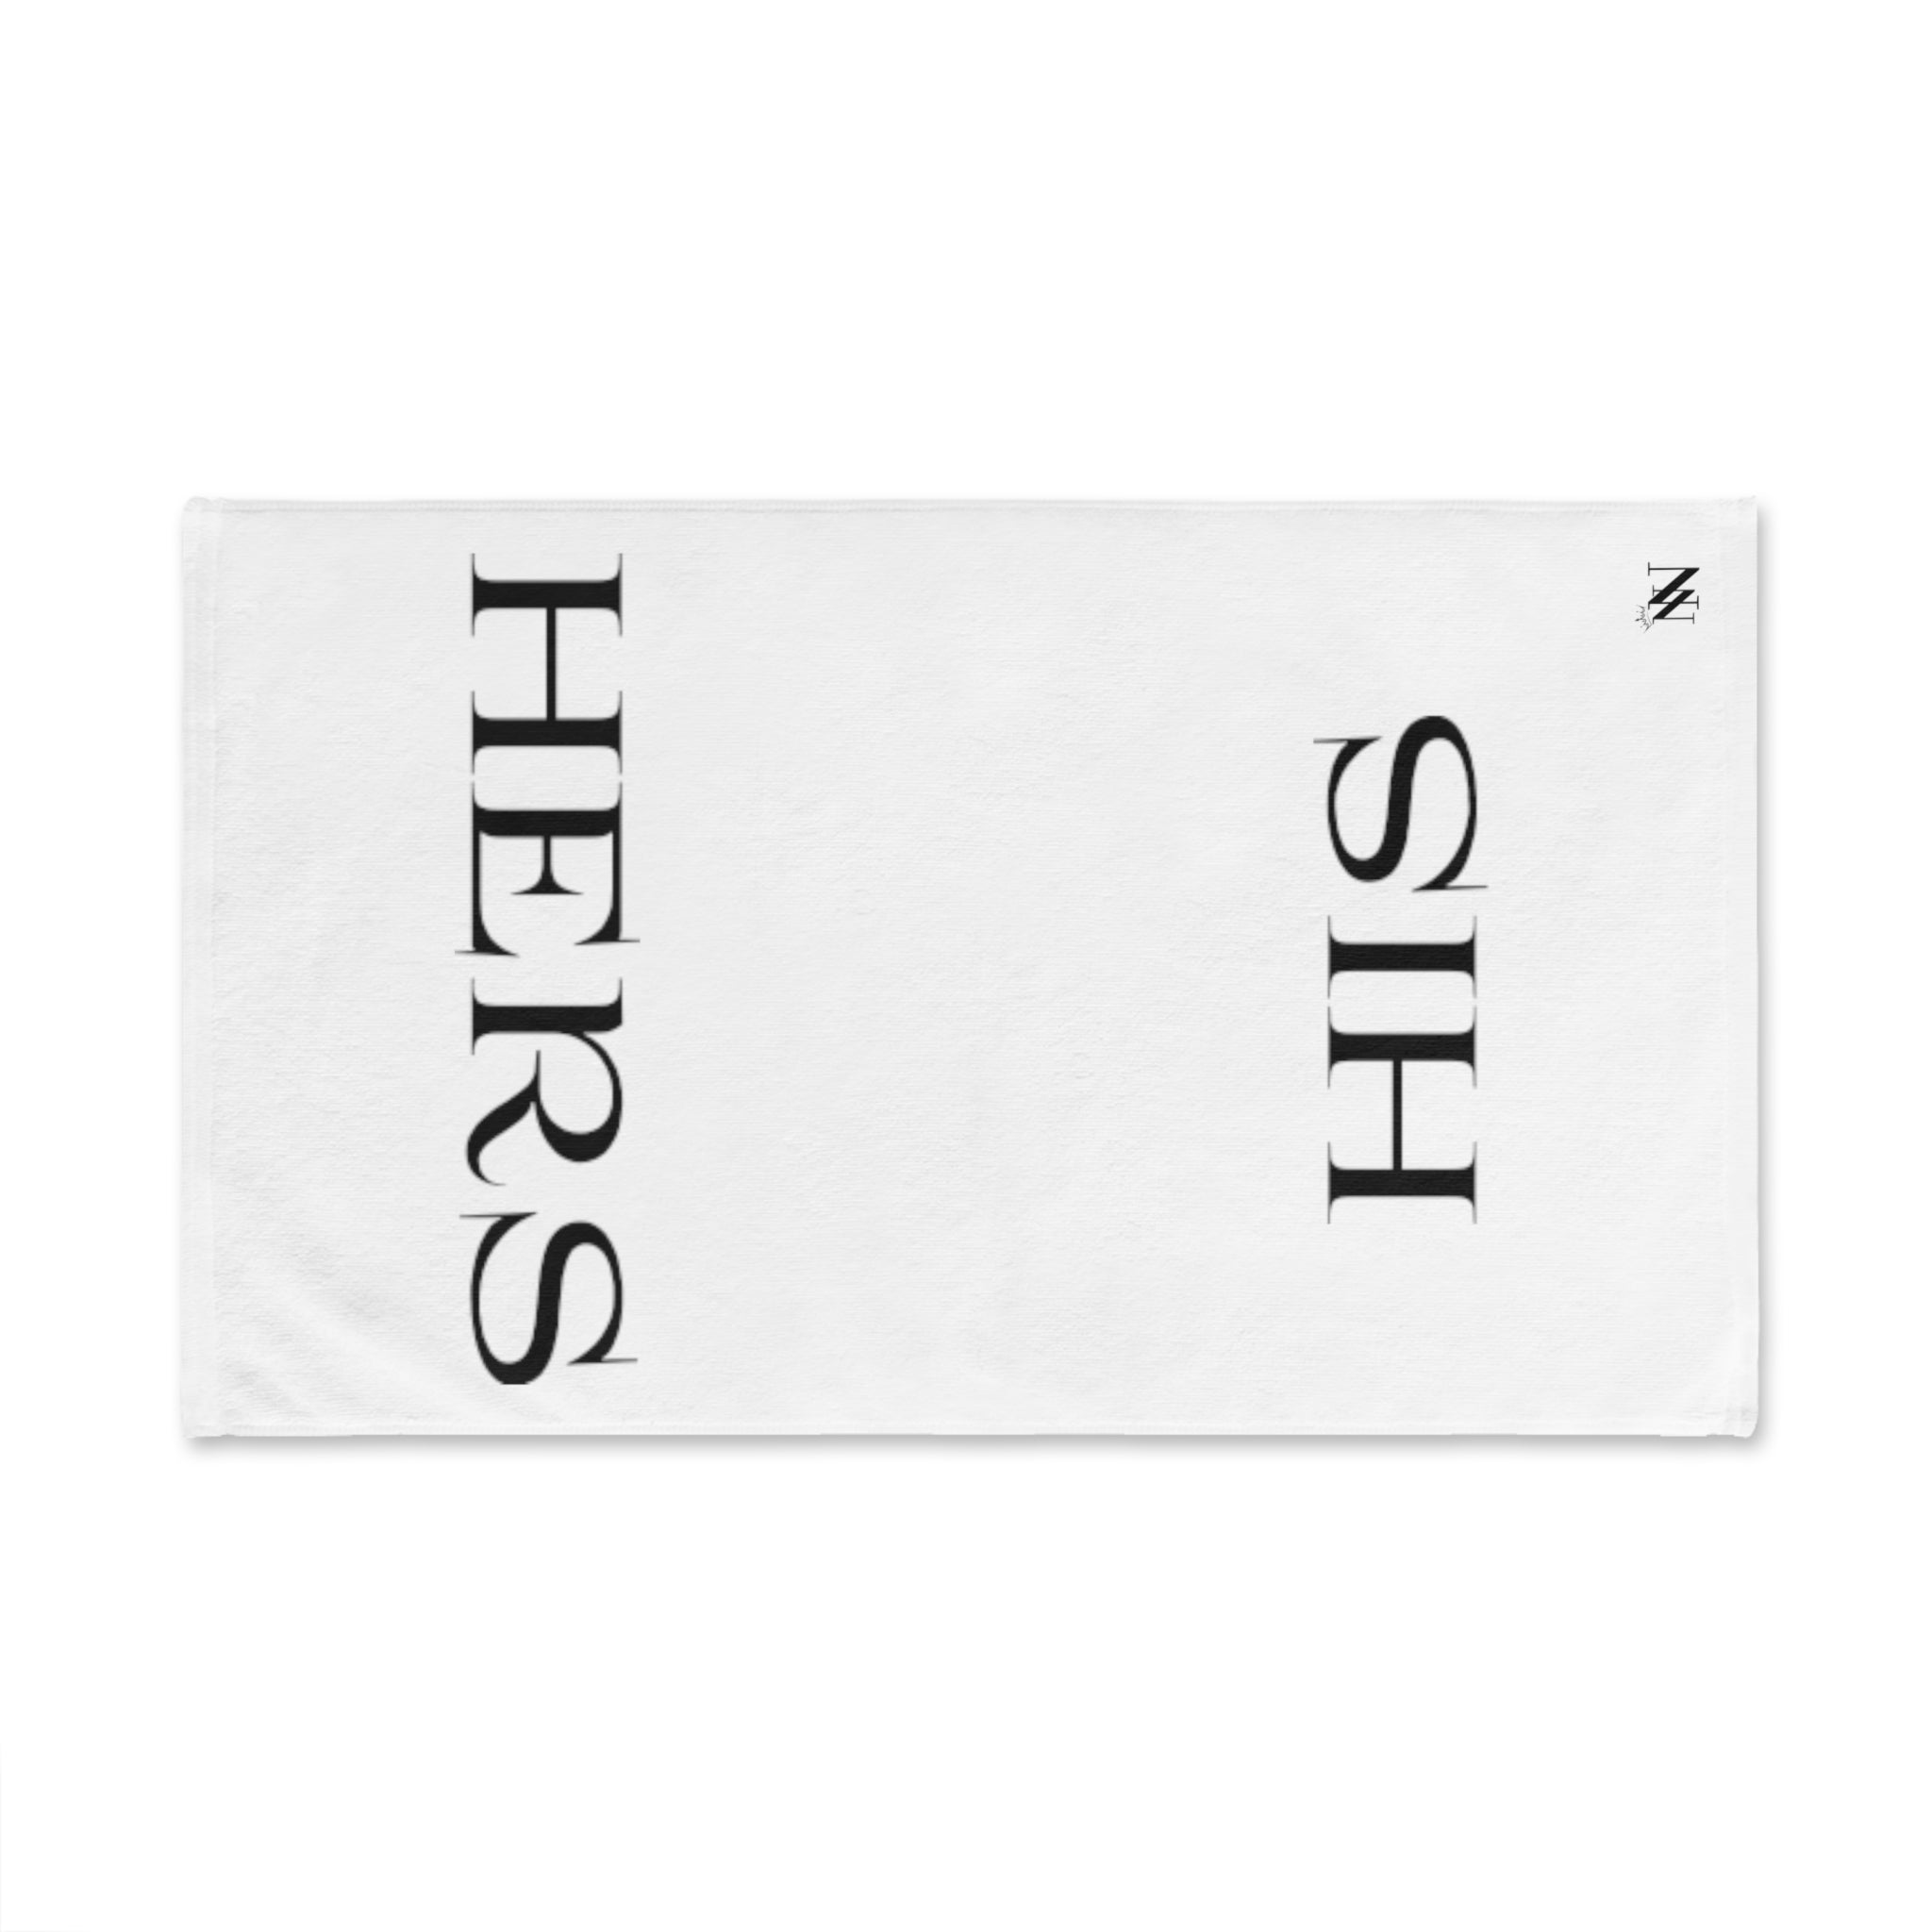 His Hers White | Funny Gifts for Men - Gifts for Him - Birthday Gifts for Men, Him, Her, Husband, Boyfriend, Girlfriend, New Couple Gifts, Fathers & Valentines Day Gifts, Christmas Gifts NECTAR NAPKINS